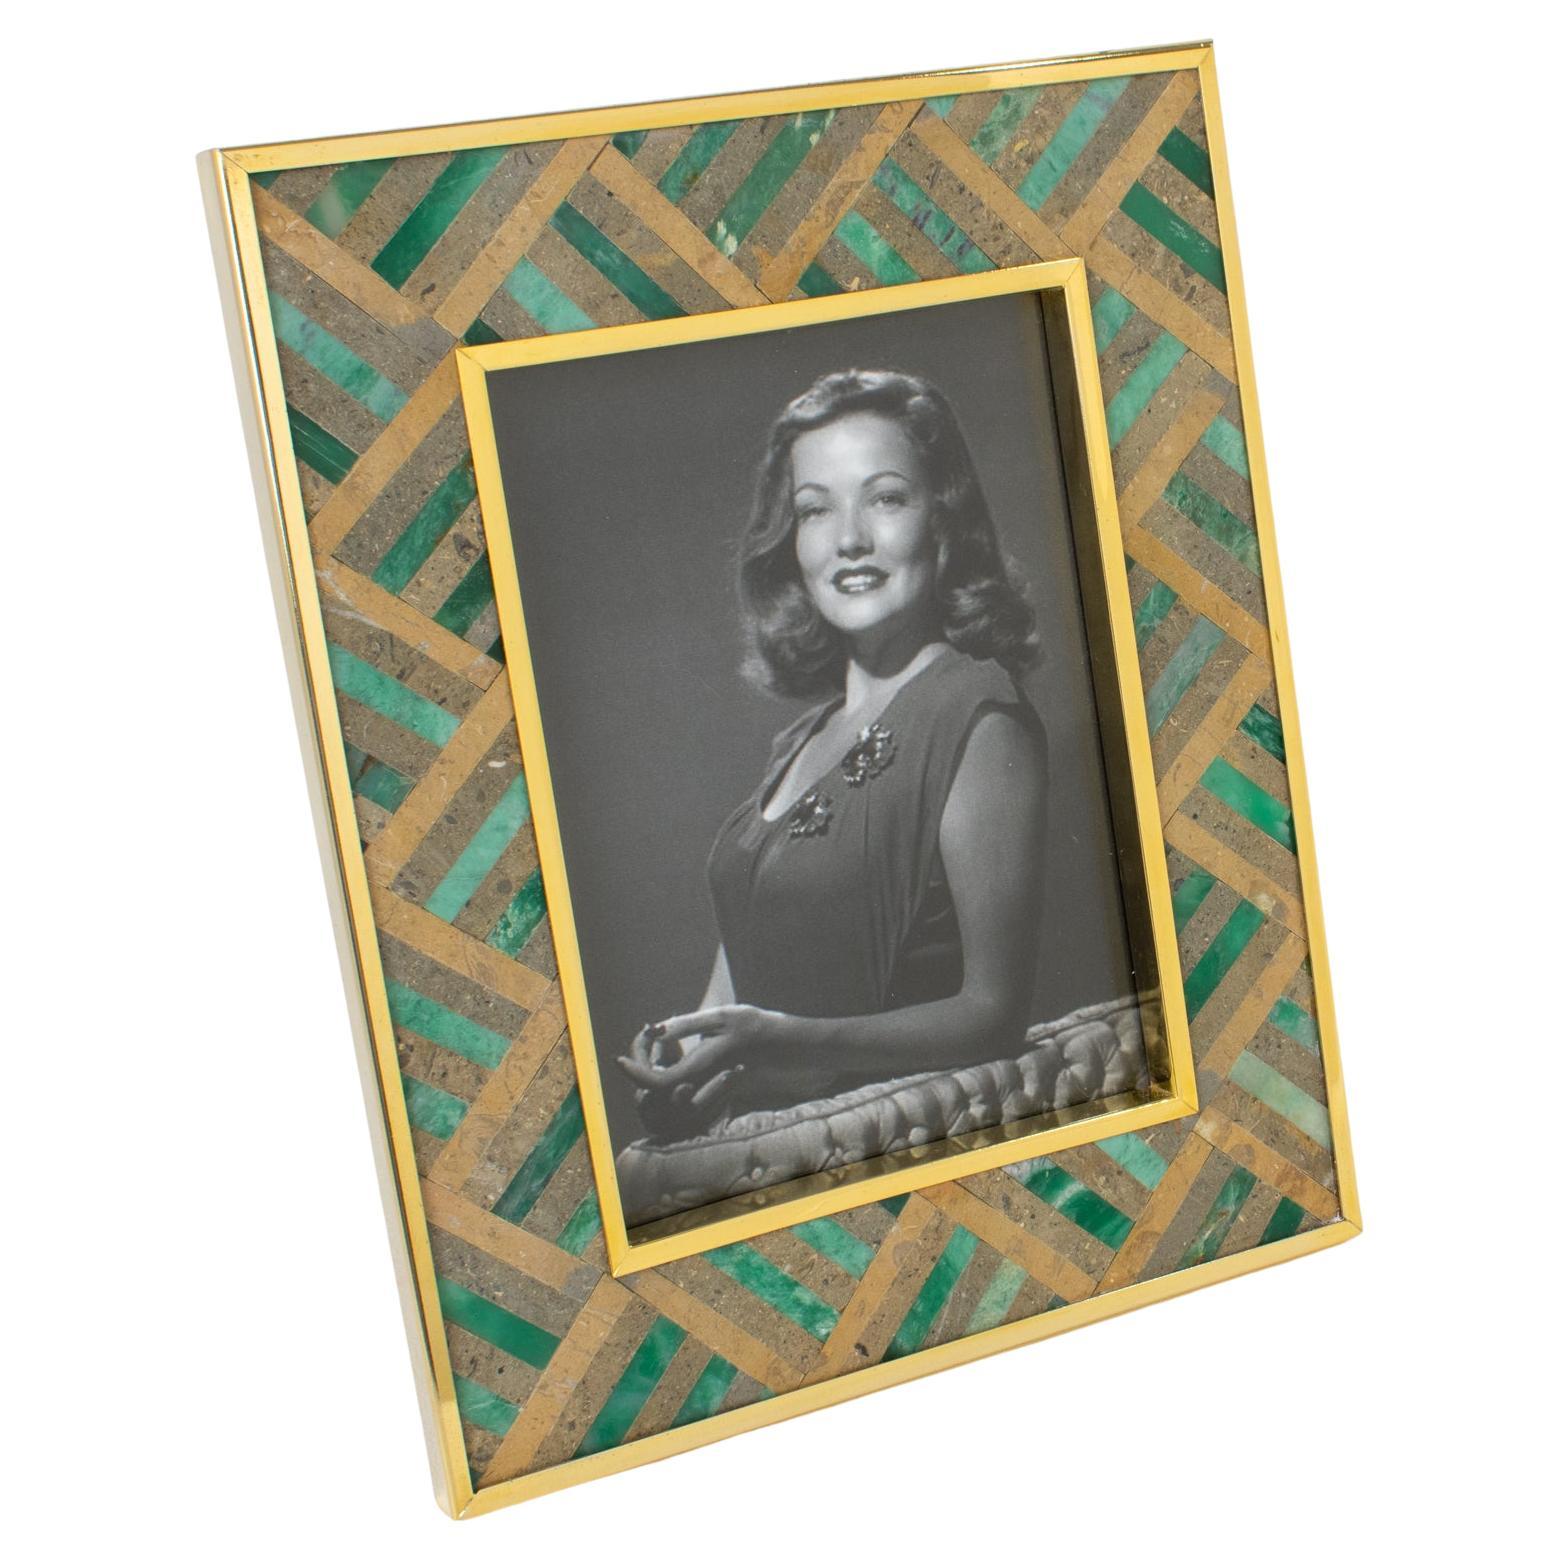 Rita Frascione Firenze Gilded Brass, Travertine and Marble Picture Frame, 1980s For Sale